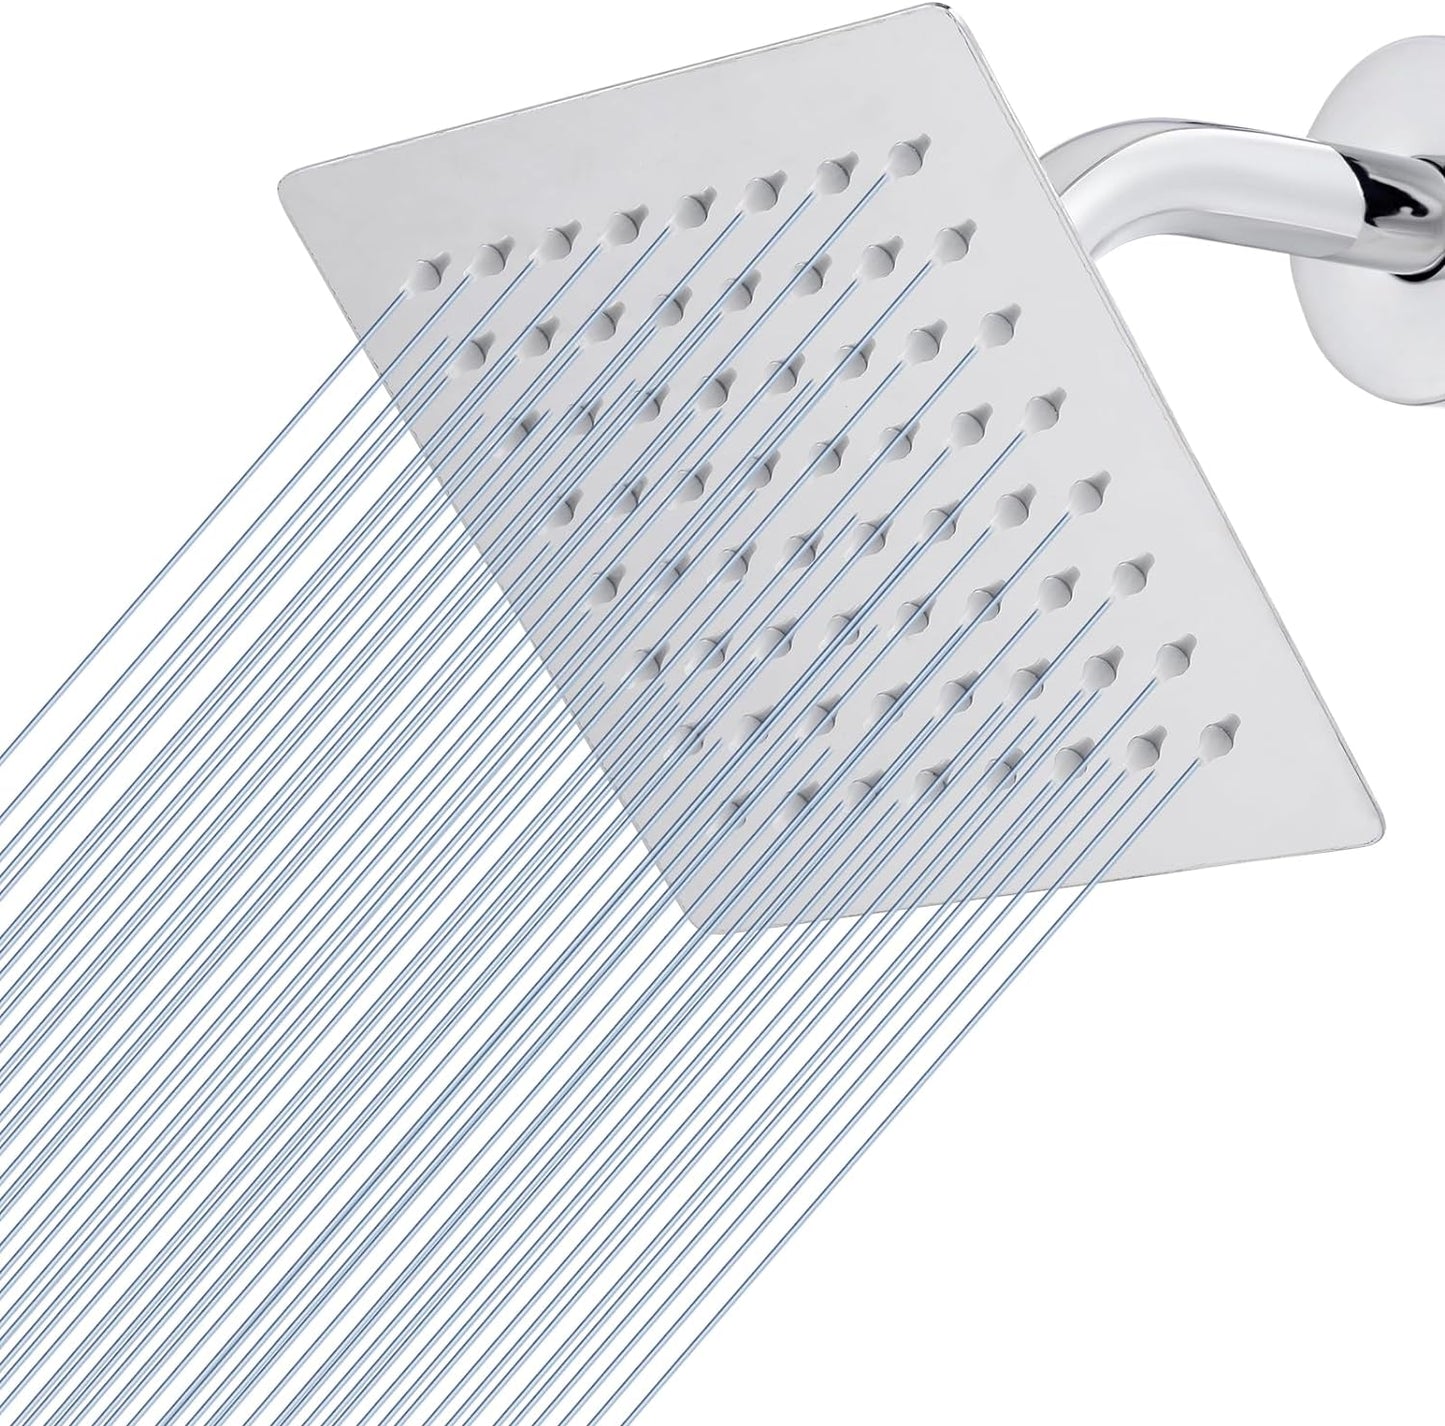 Fossa 6"X6" Inch Rain Shower - Square High Pressure Shower Head Made of 304 Stainless Steel Chrome Finish (With Arm Set 12" Inch) Fossa Home